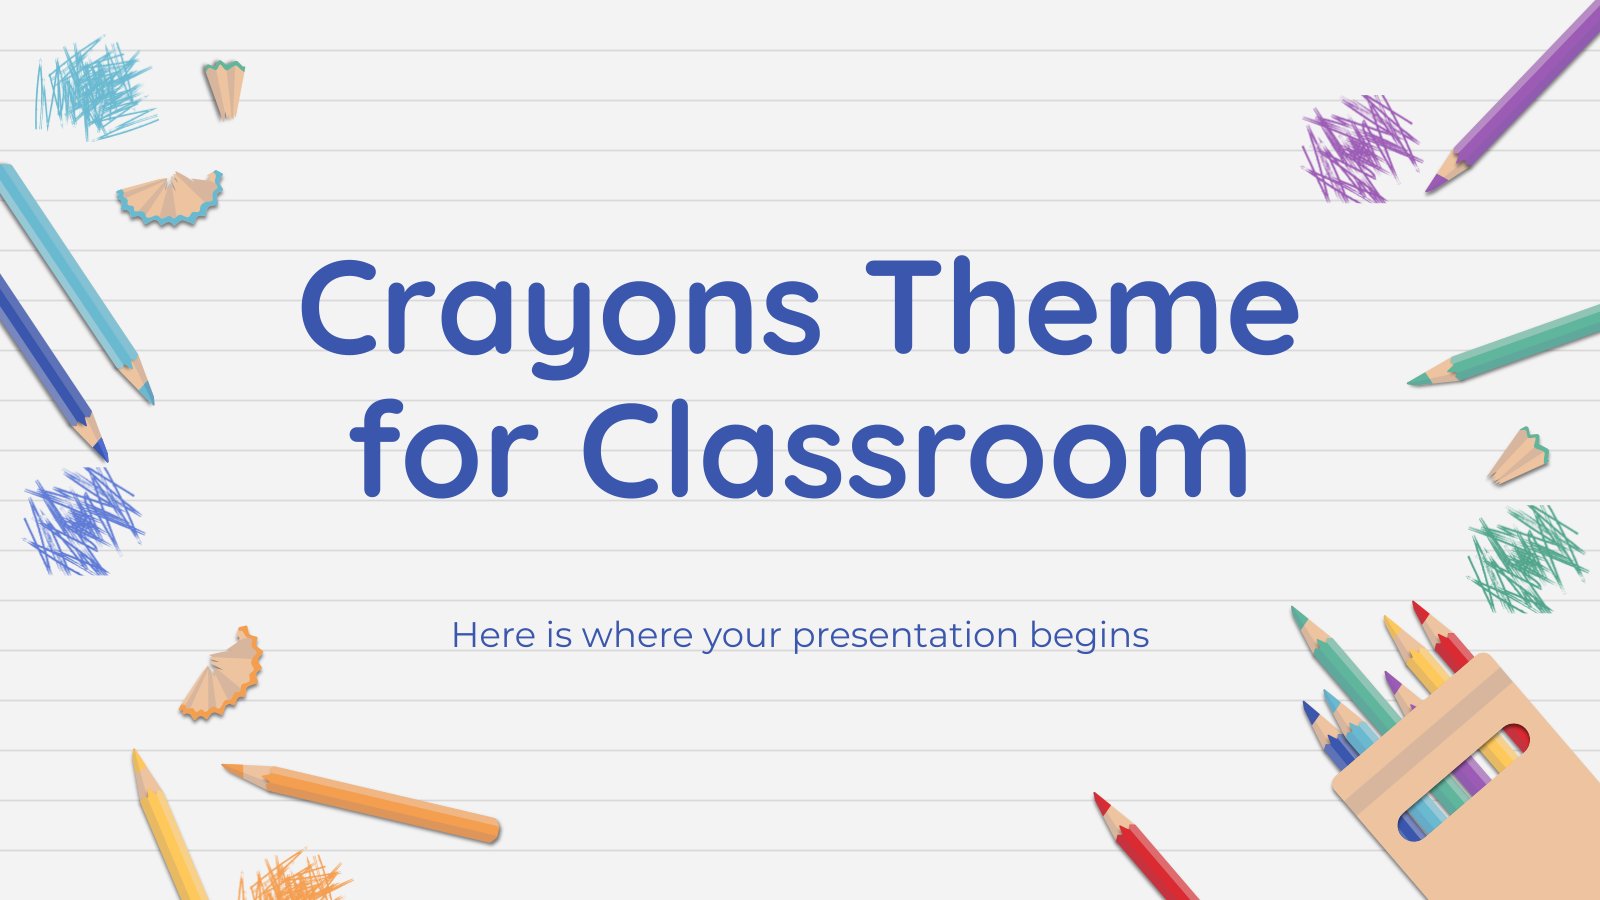 Crayons Theme for Classroom presentation template 